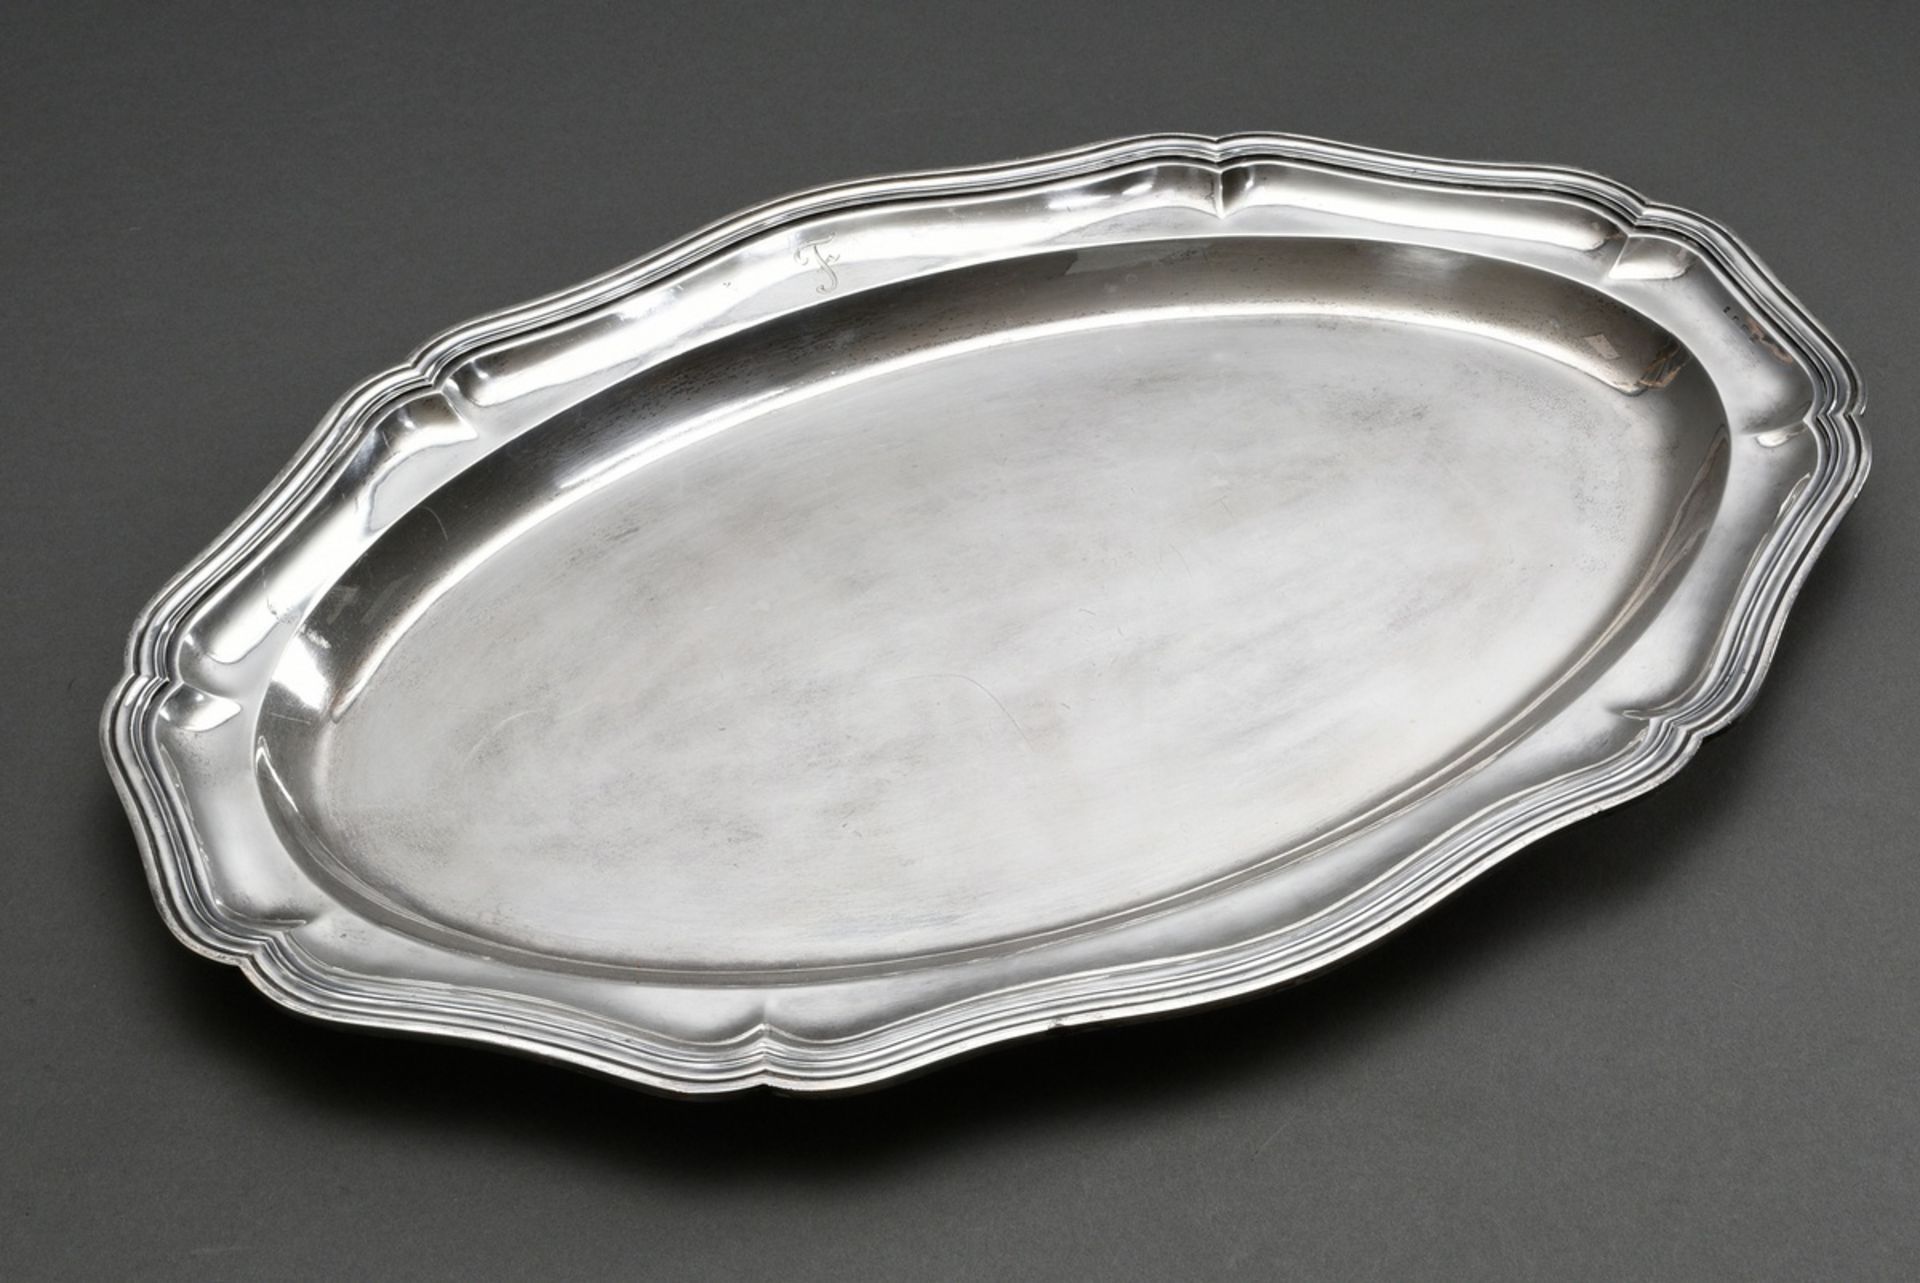 Large oval plate with chippendale rim and monogram "F", MM: Ernst Mehner/Stuttgart, silver 800, 212